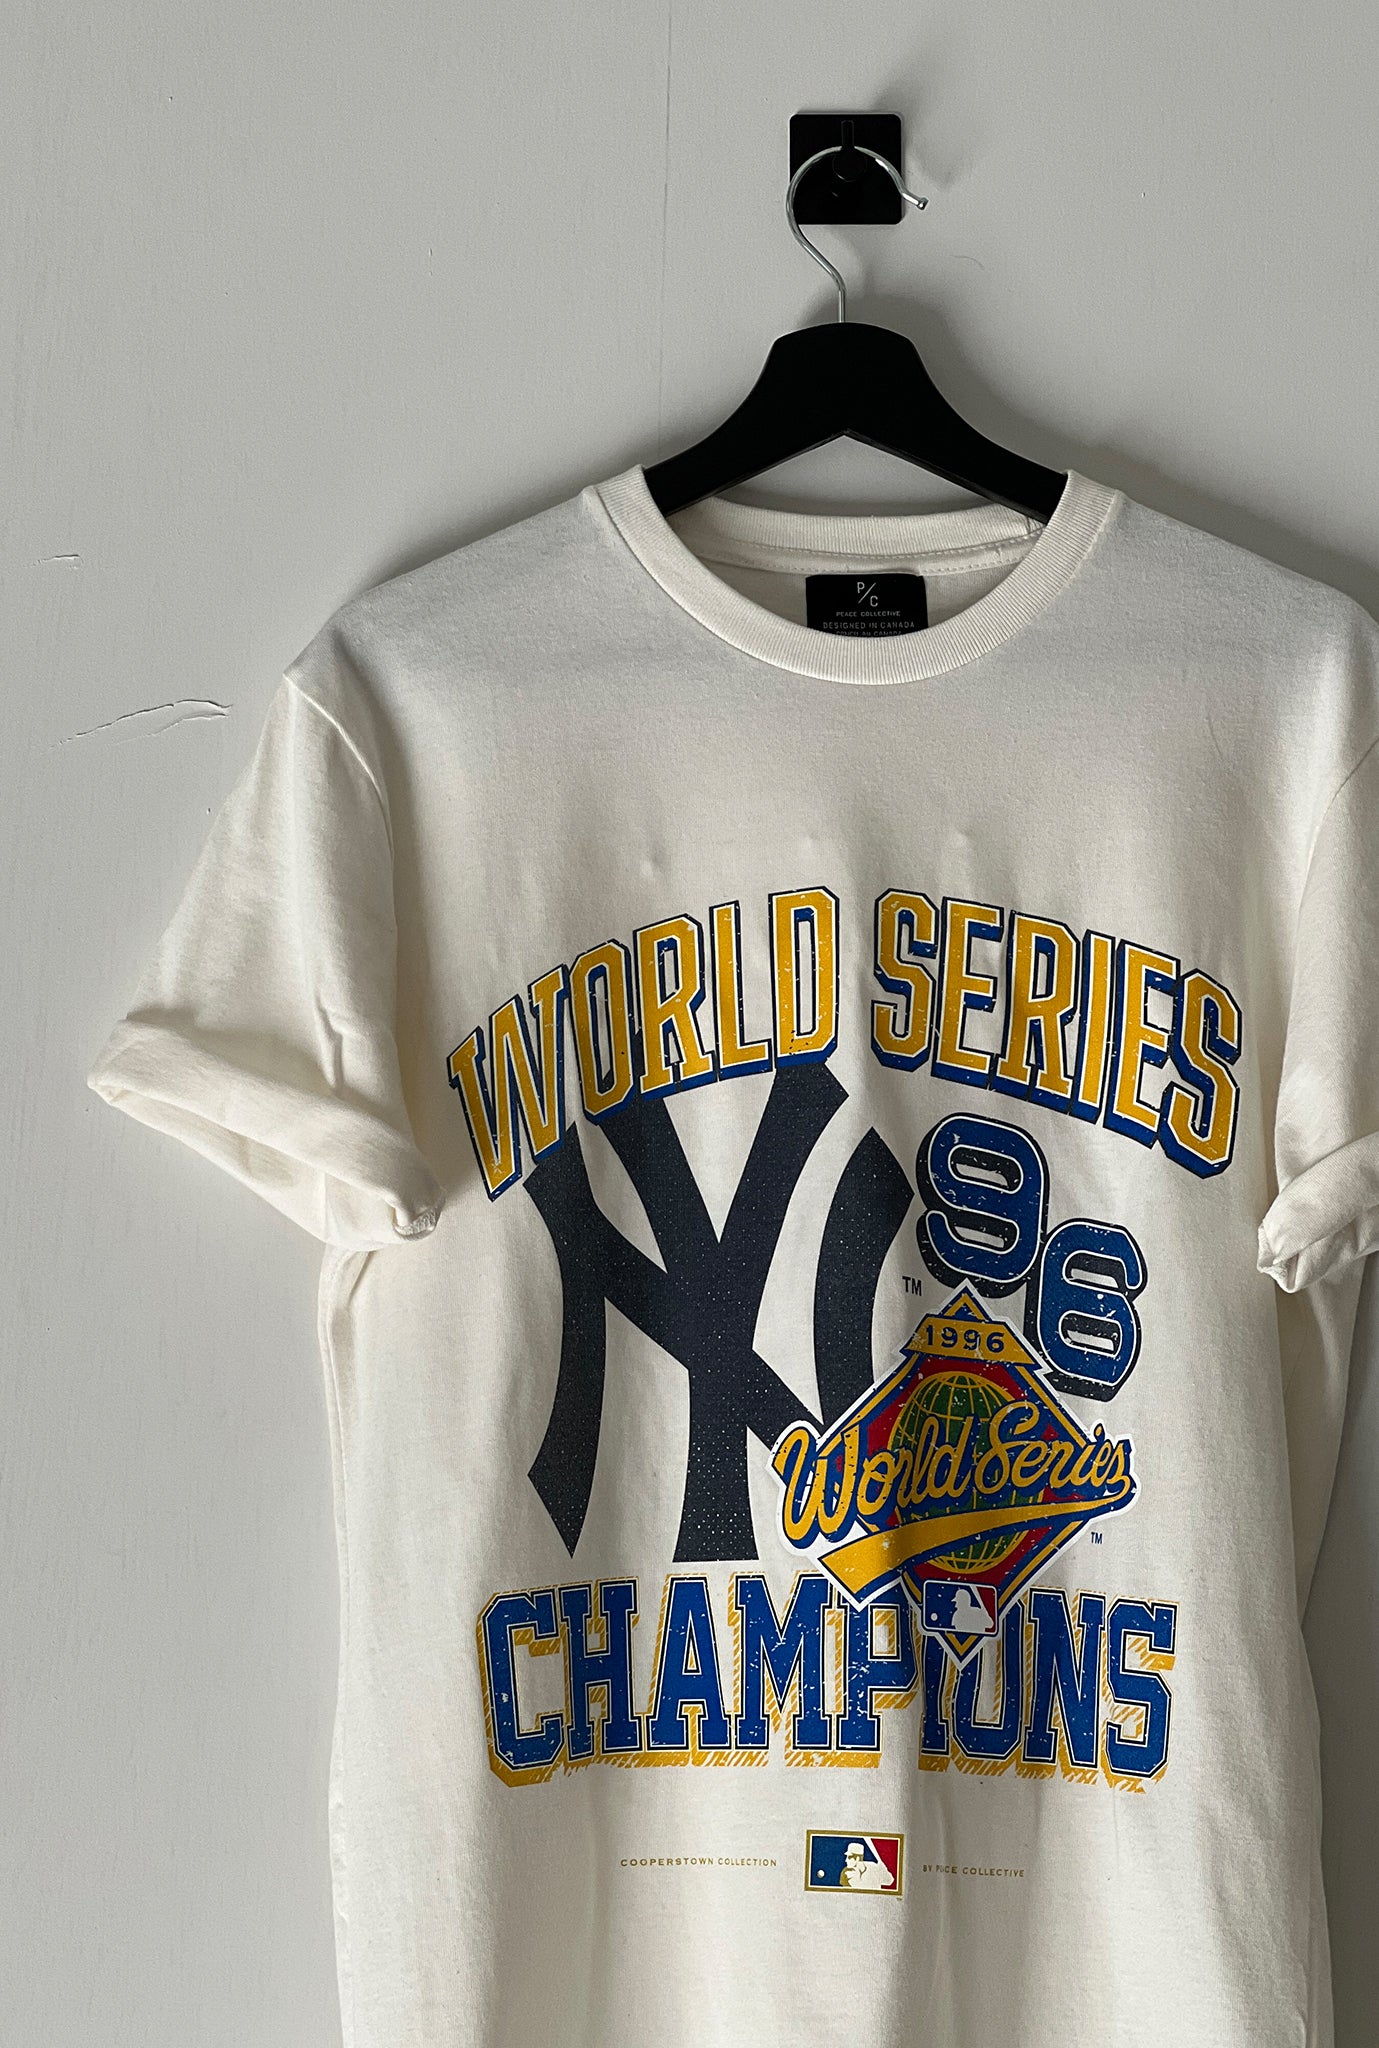 New York Yankees 1996 World Series Cooperstown Collection Premium T-Shirt - Natural